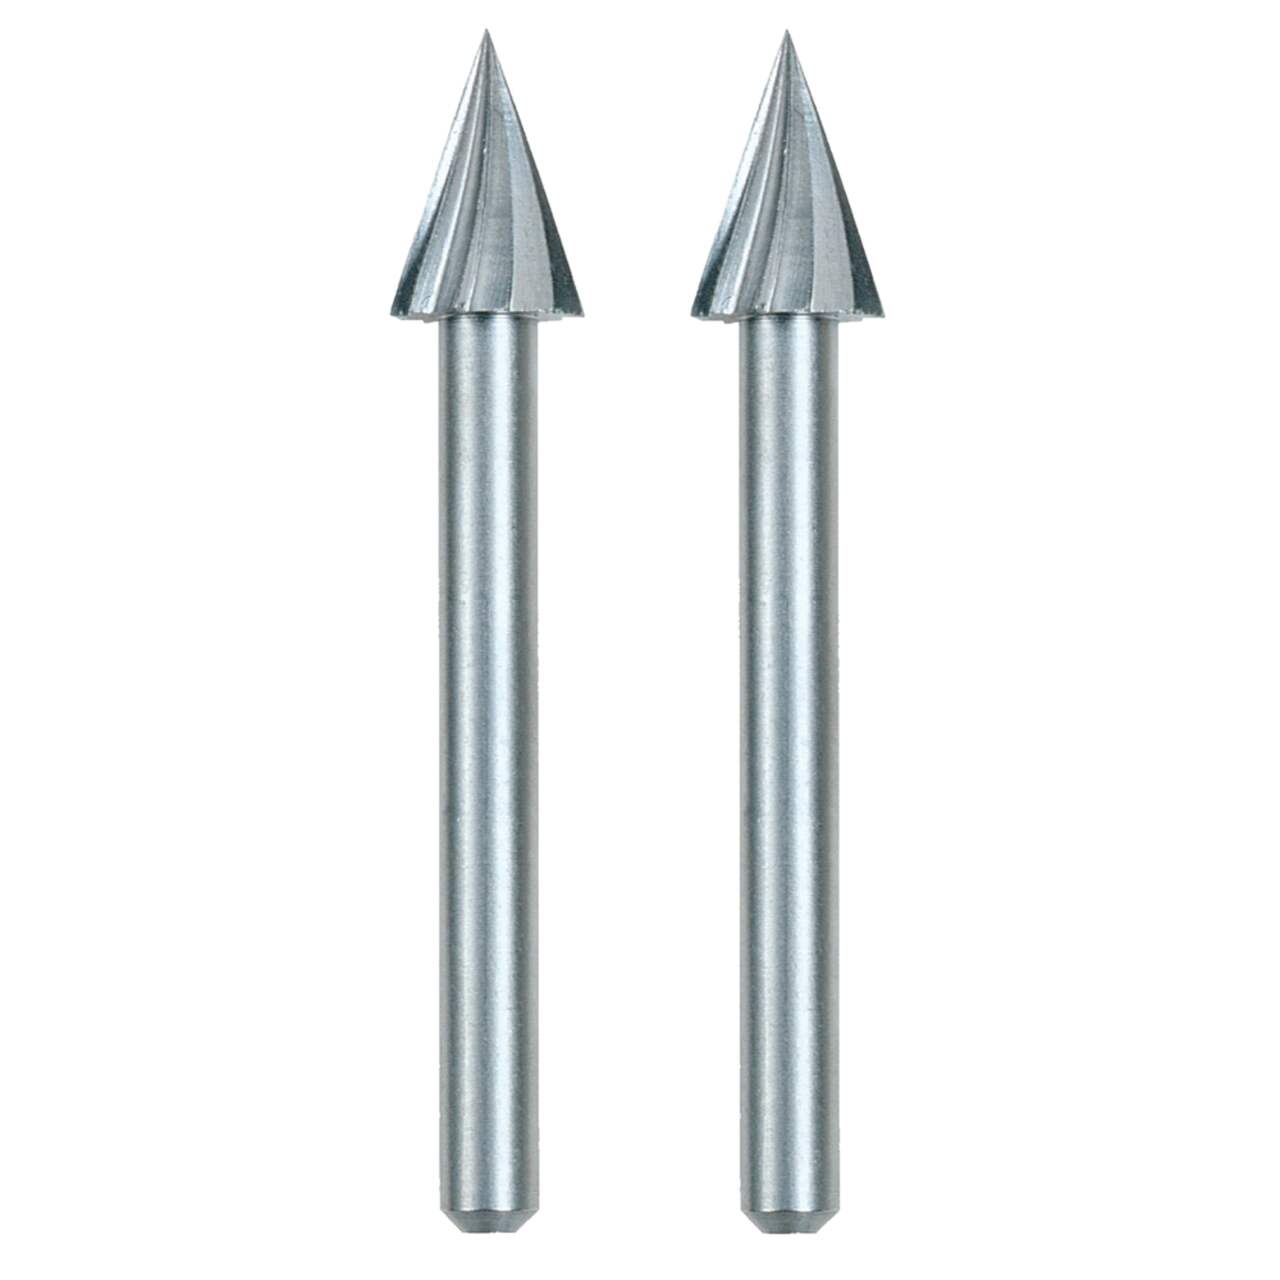 Dremel 125 Arrow-Shaped Steel Carving/Engraving Bit For Rotary Tool,  1/4-in, 2-pk